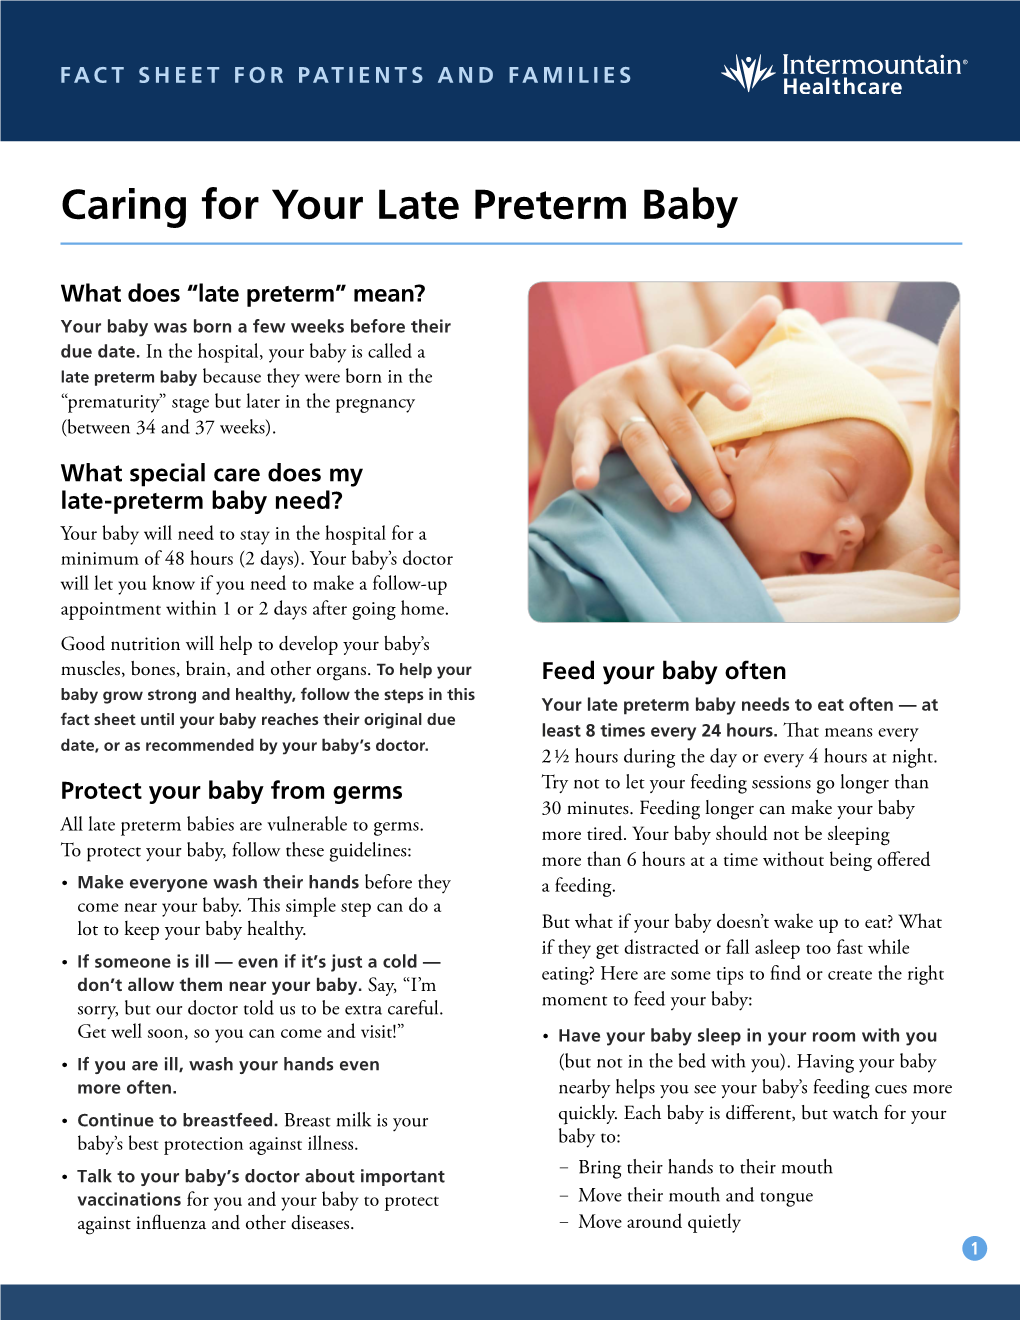 Caring for Your Late Preterm Baby